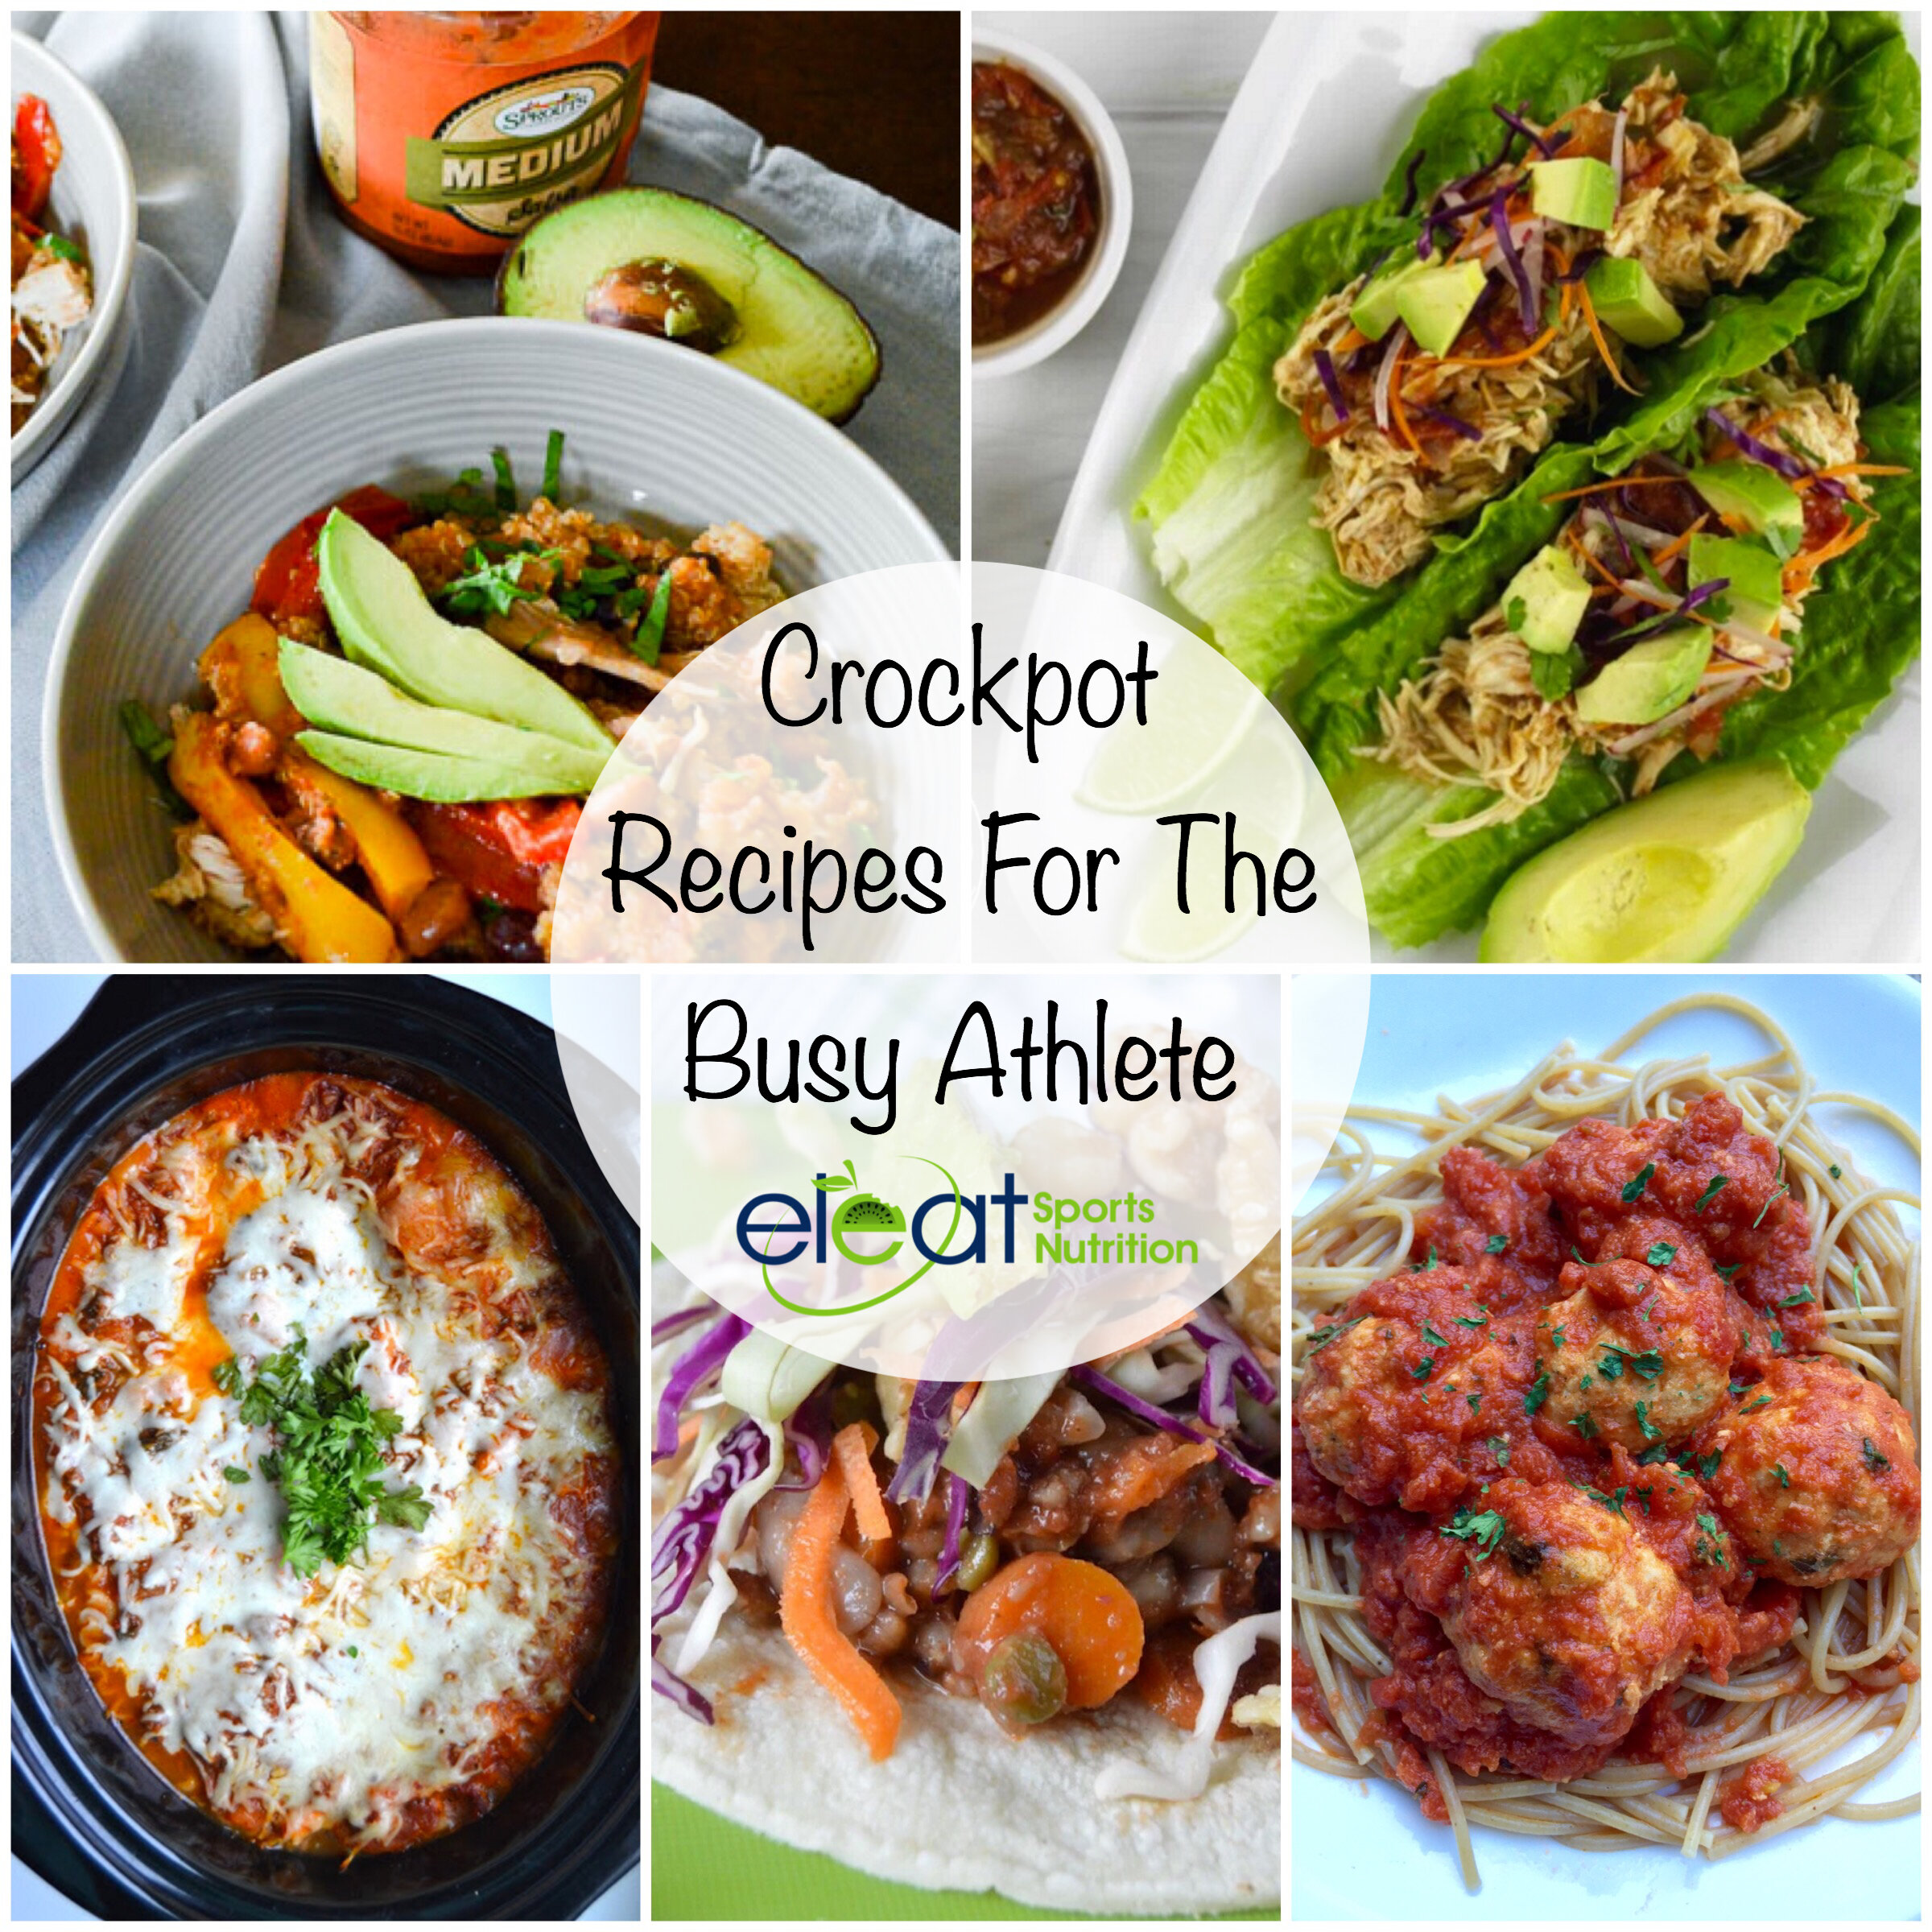 Crockpot Recipes For The Busy Athlete — Eleat Sports Nutrition